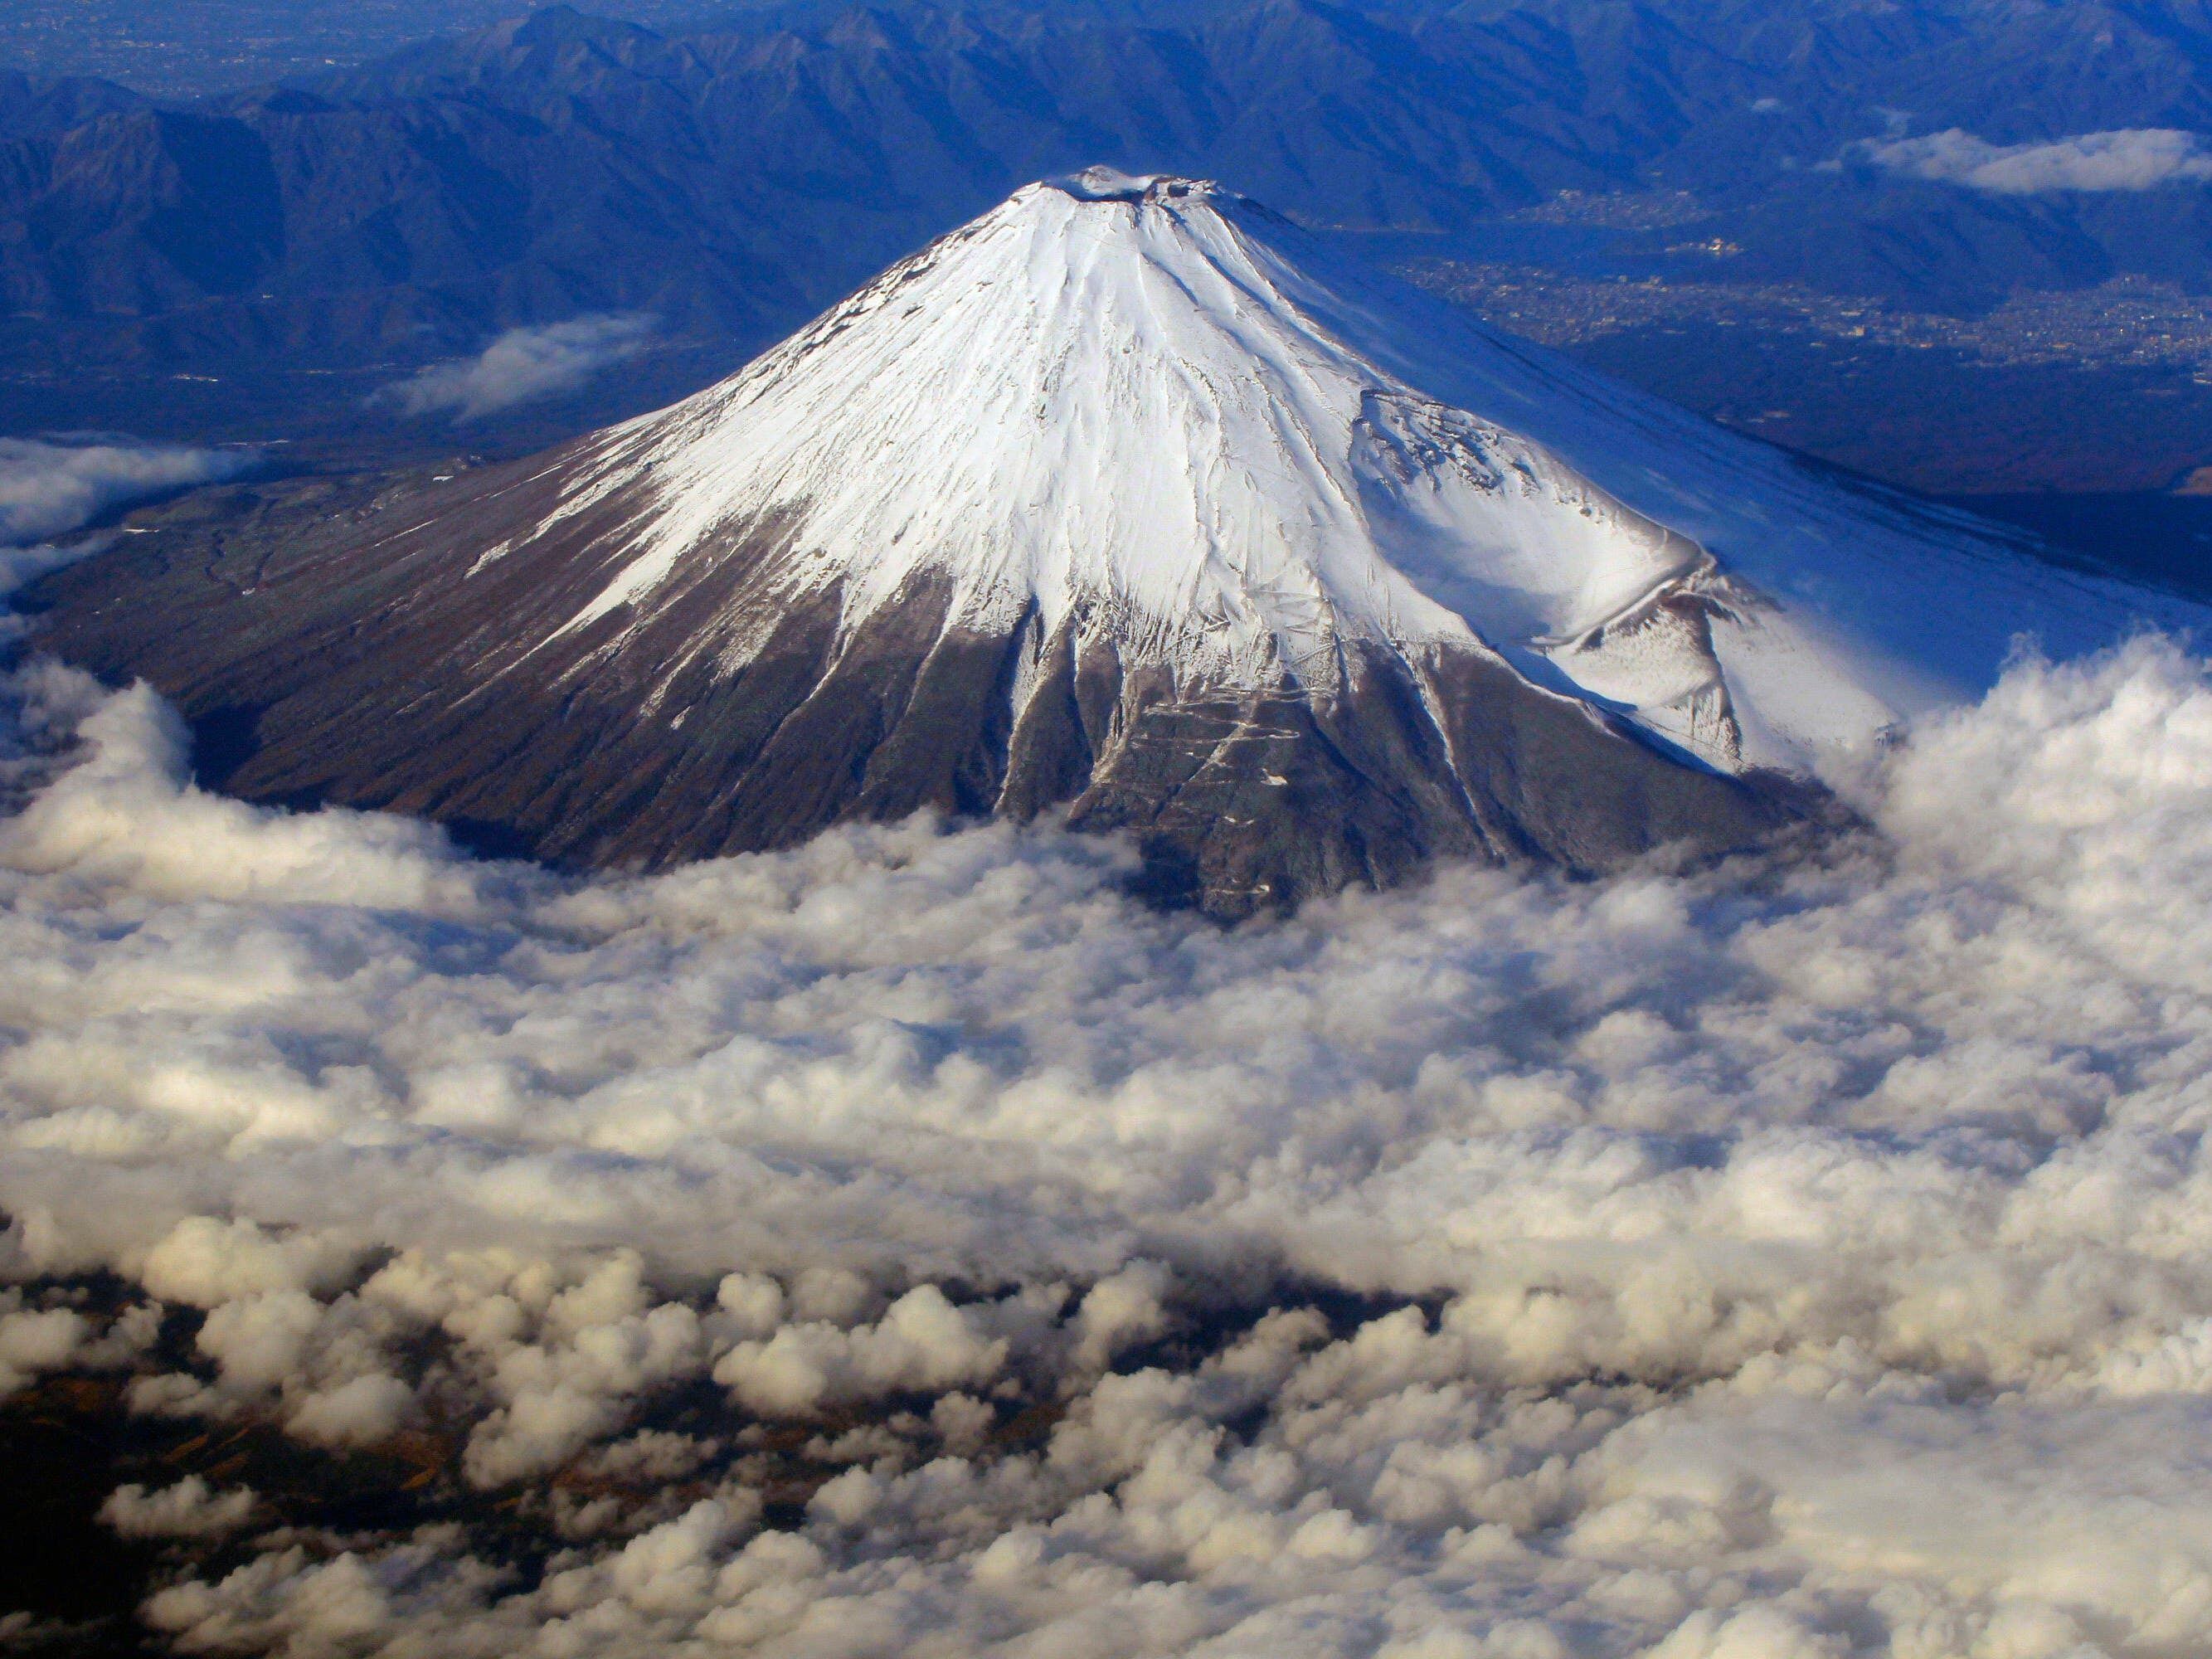 Japan imposes new rules to climb Mount Fuji to combat tourism and littering